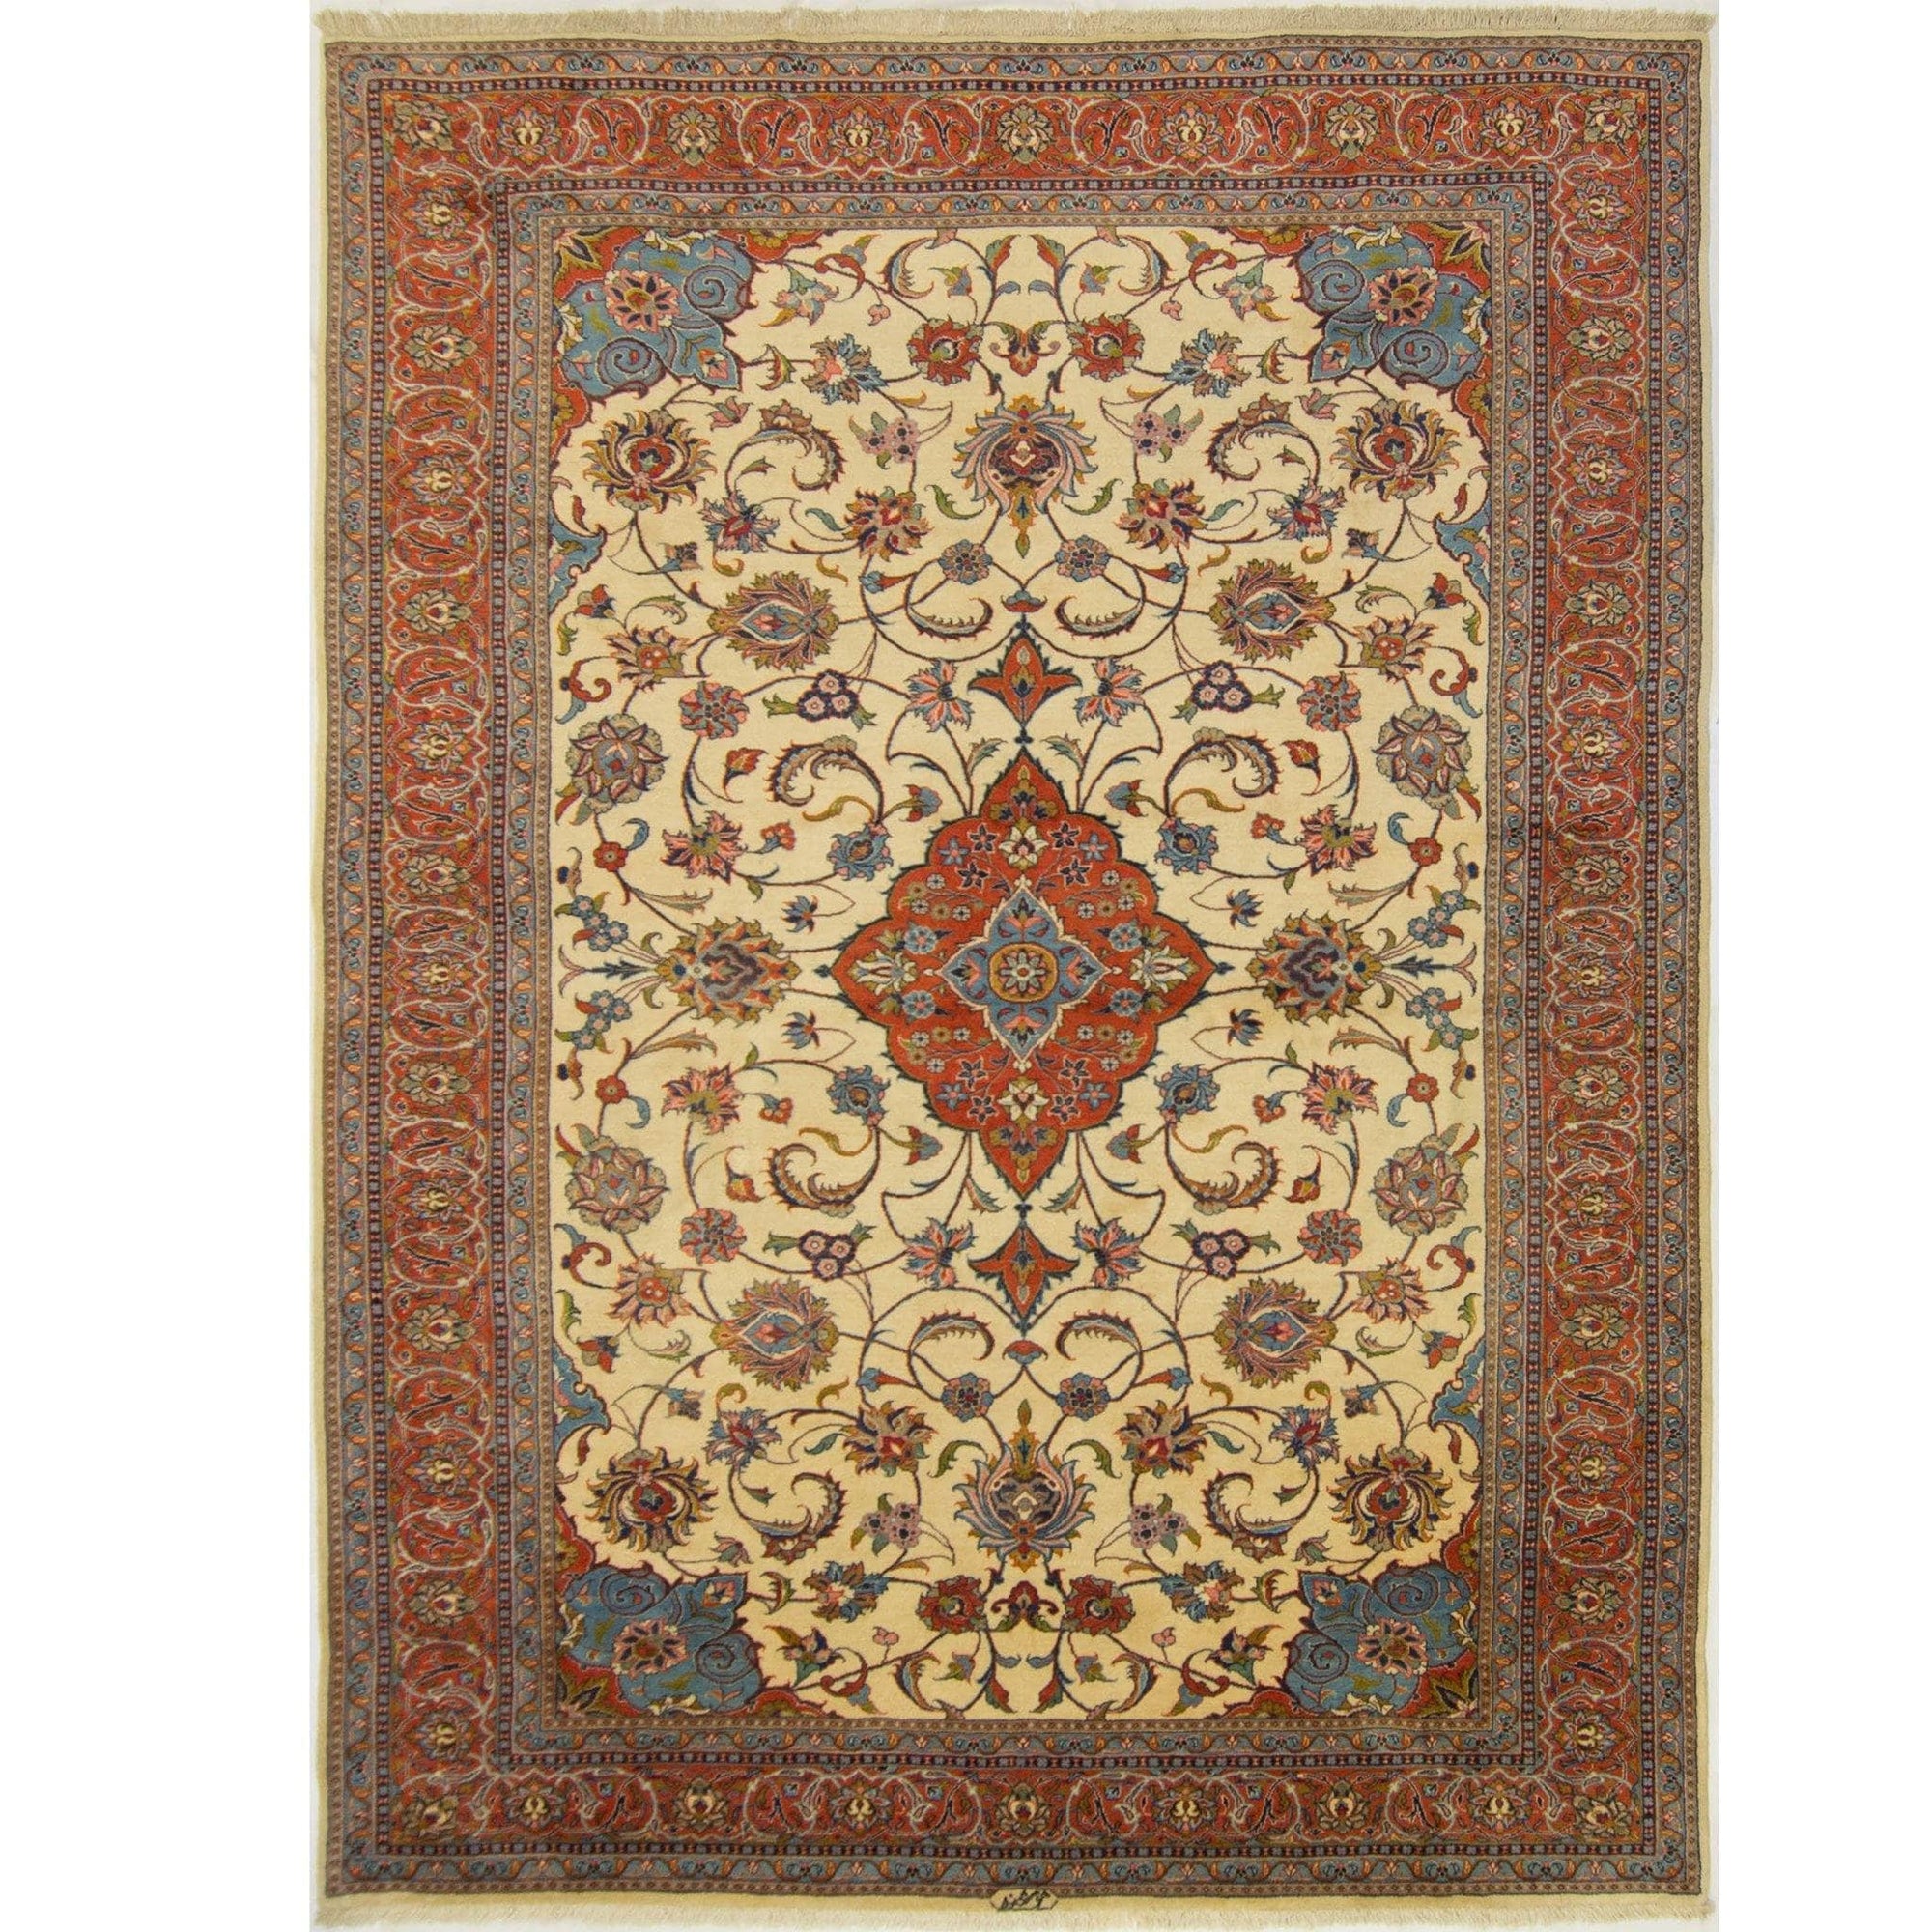 Fine Hand-knotted Persian Saruk Rug 245cm x 340cm